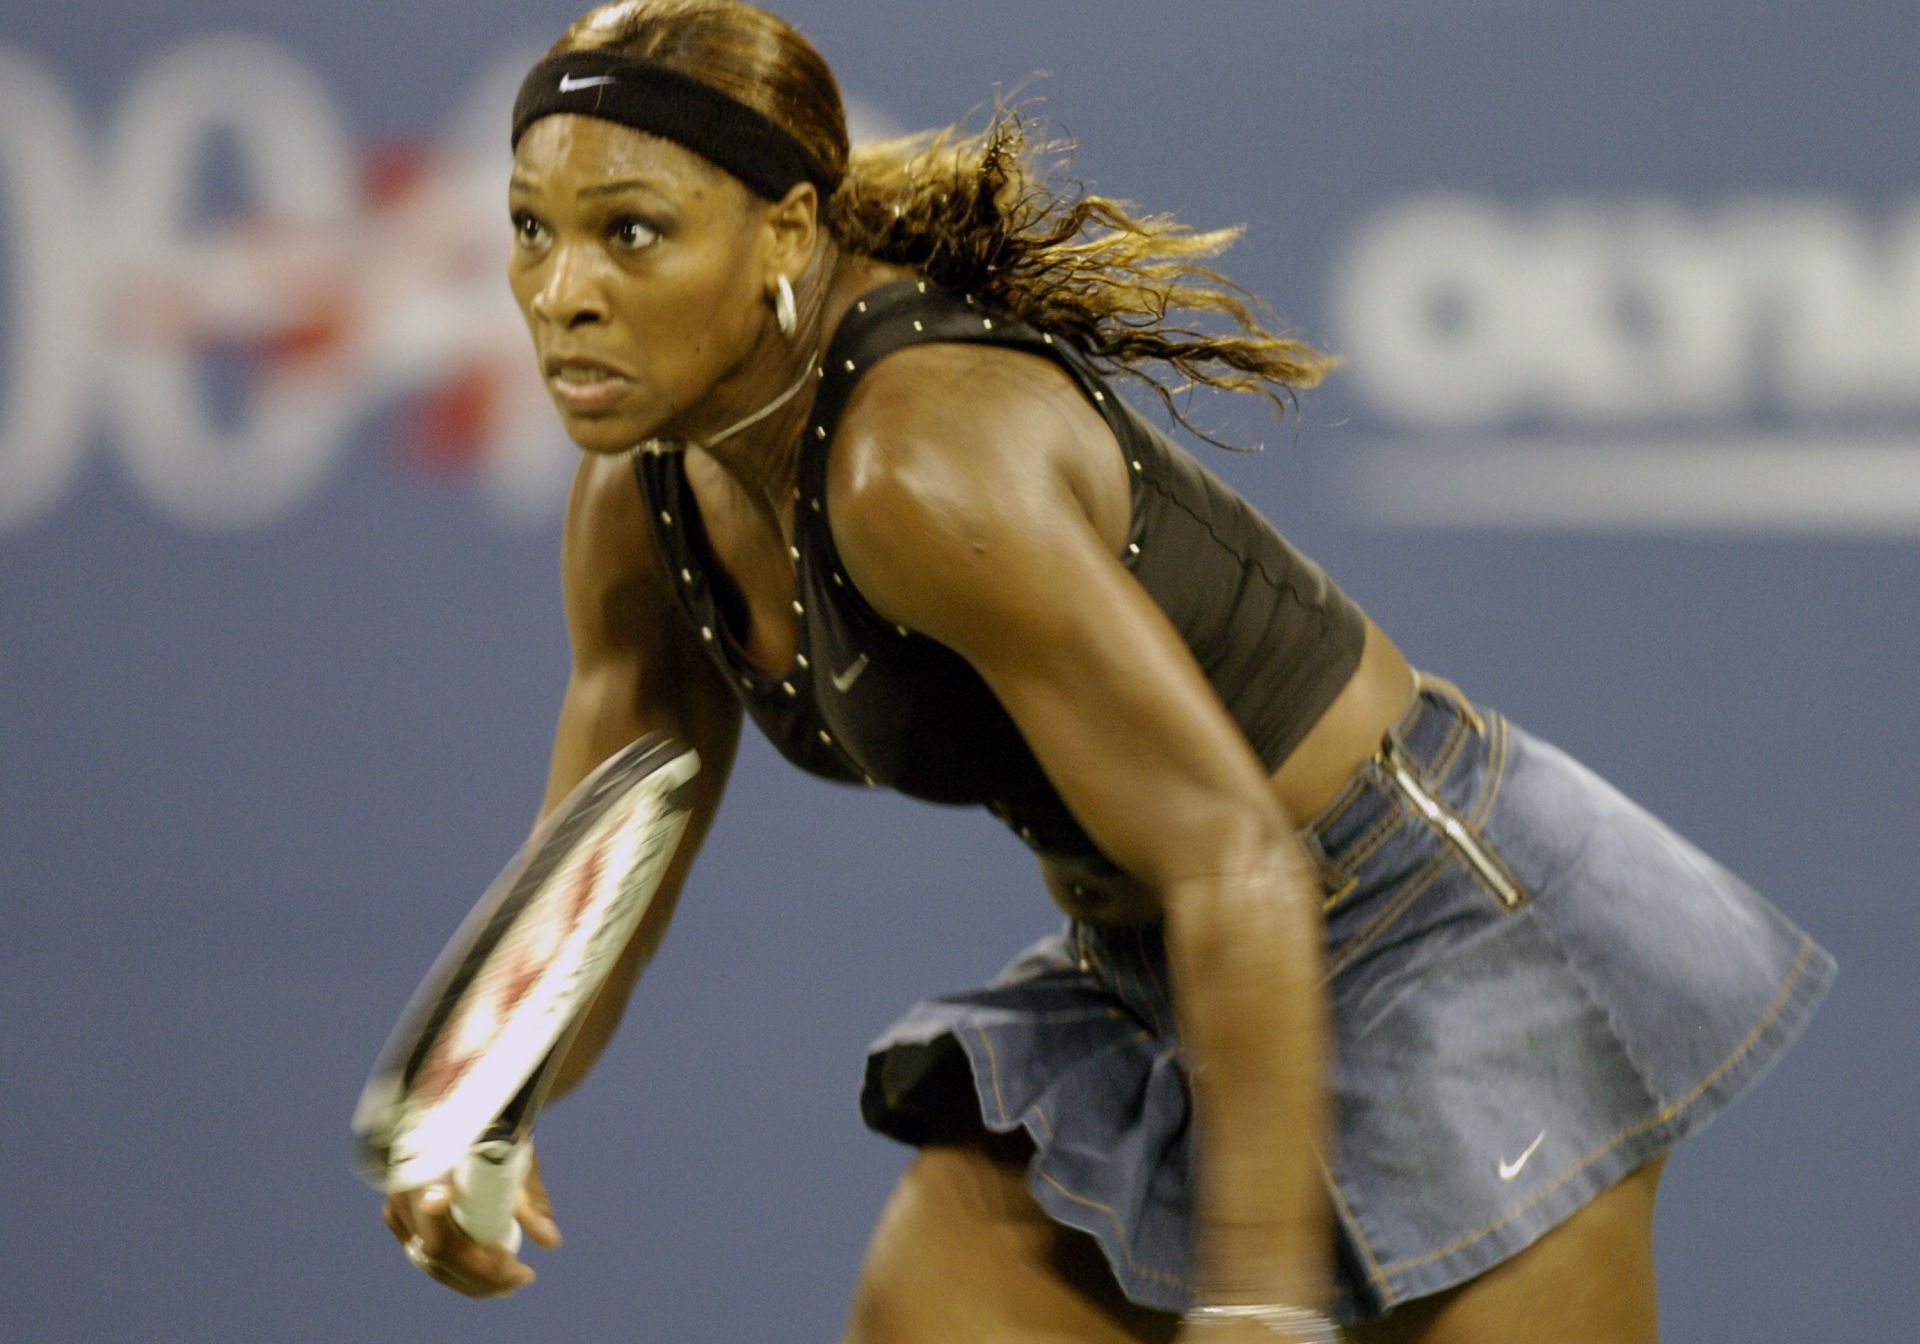 Serena Williams sports a denim miniskirt by Nike at the 2004 US Open